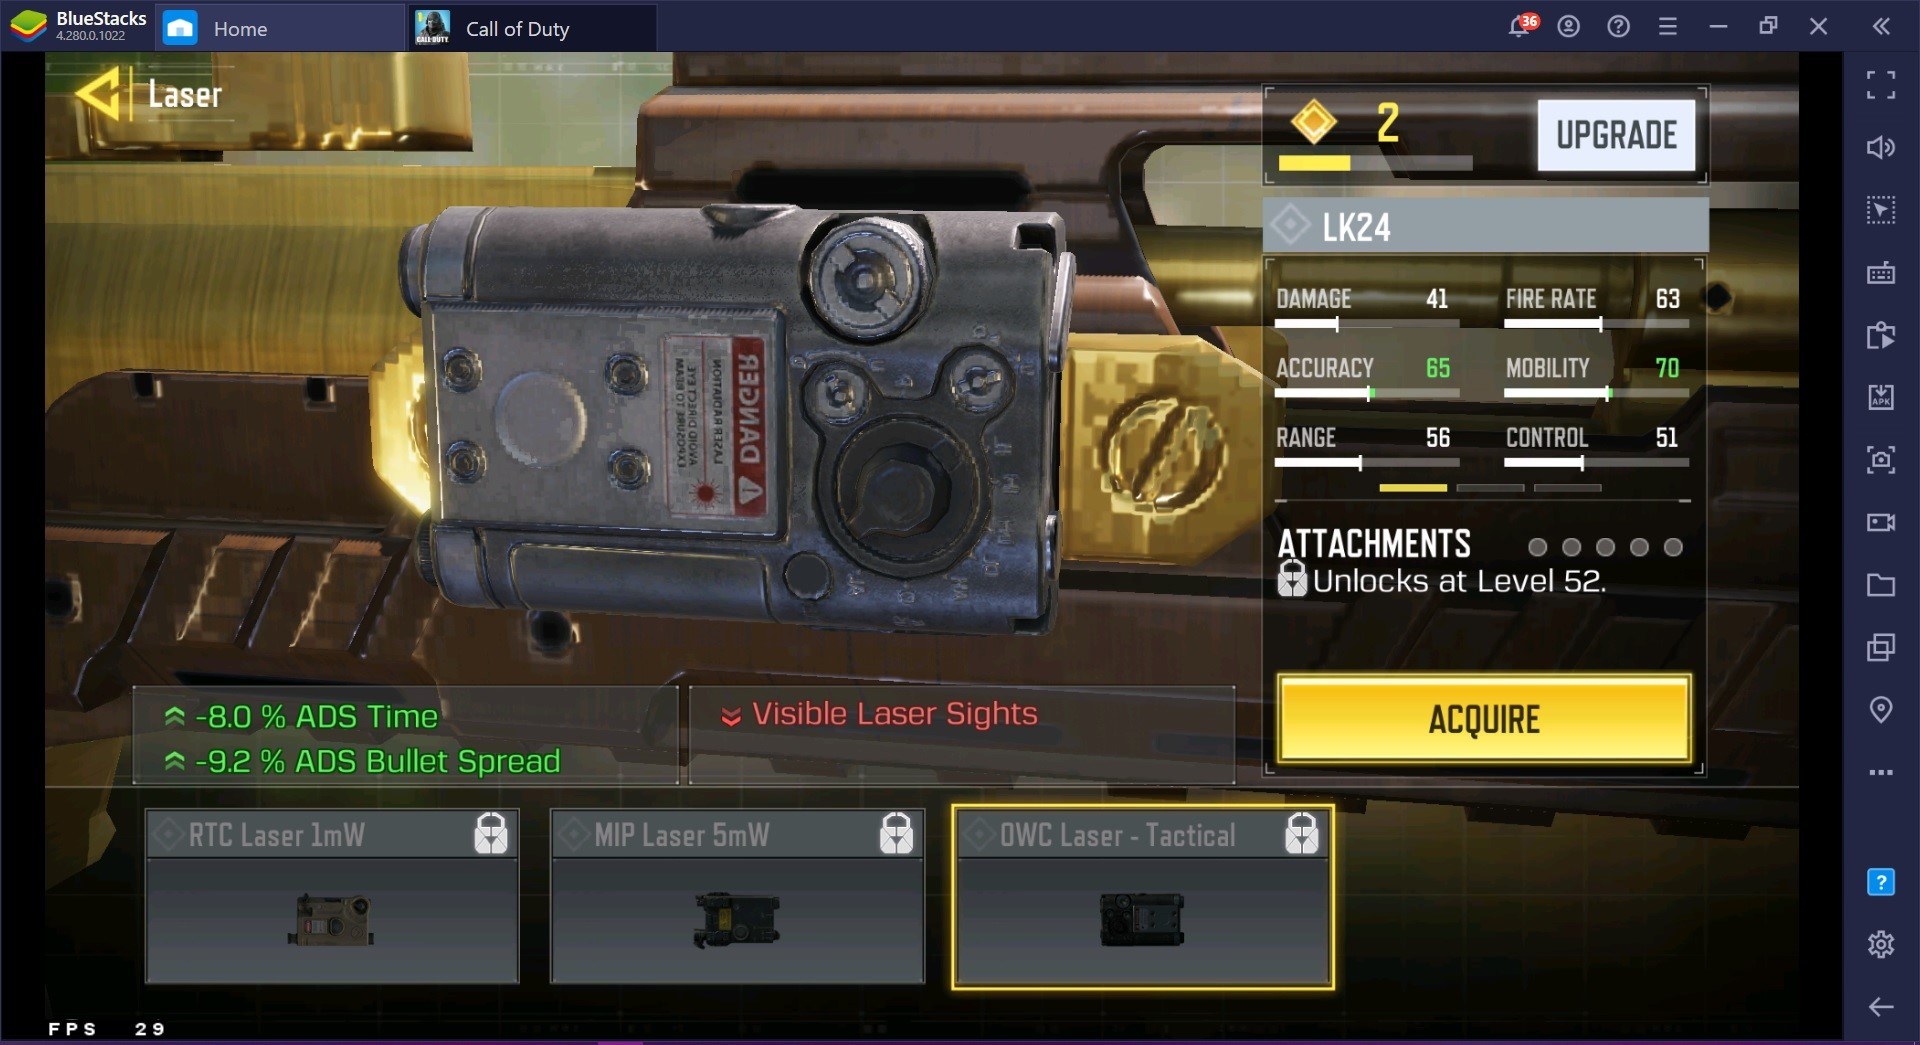 Call of Duty: Mobile Weapon Guide - It's Time to Reconsider the LK24